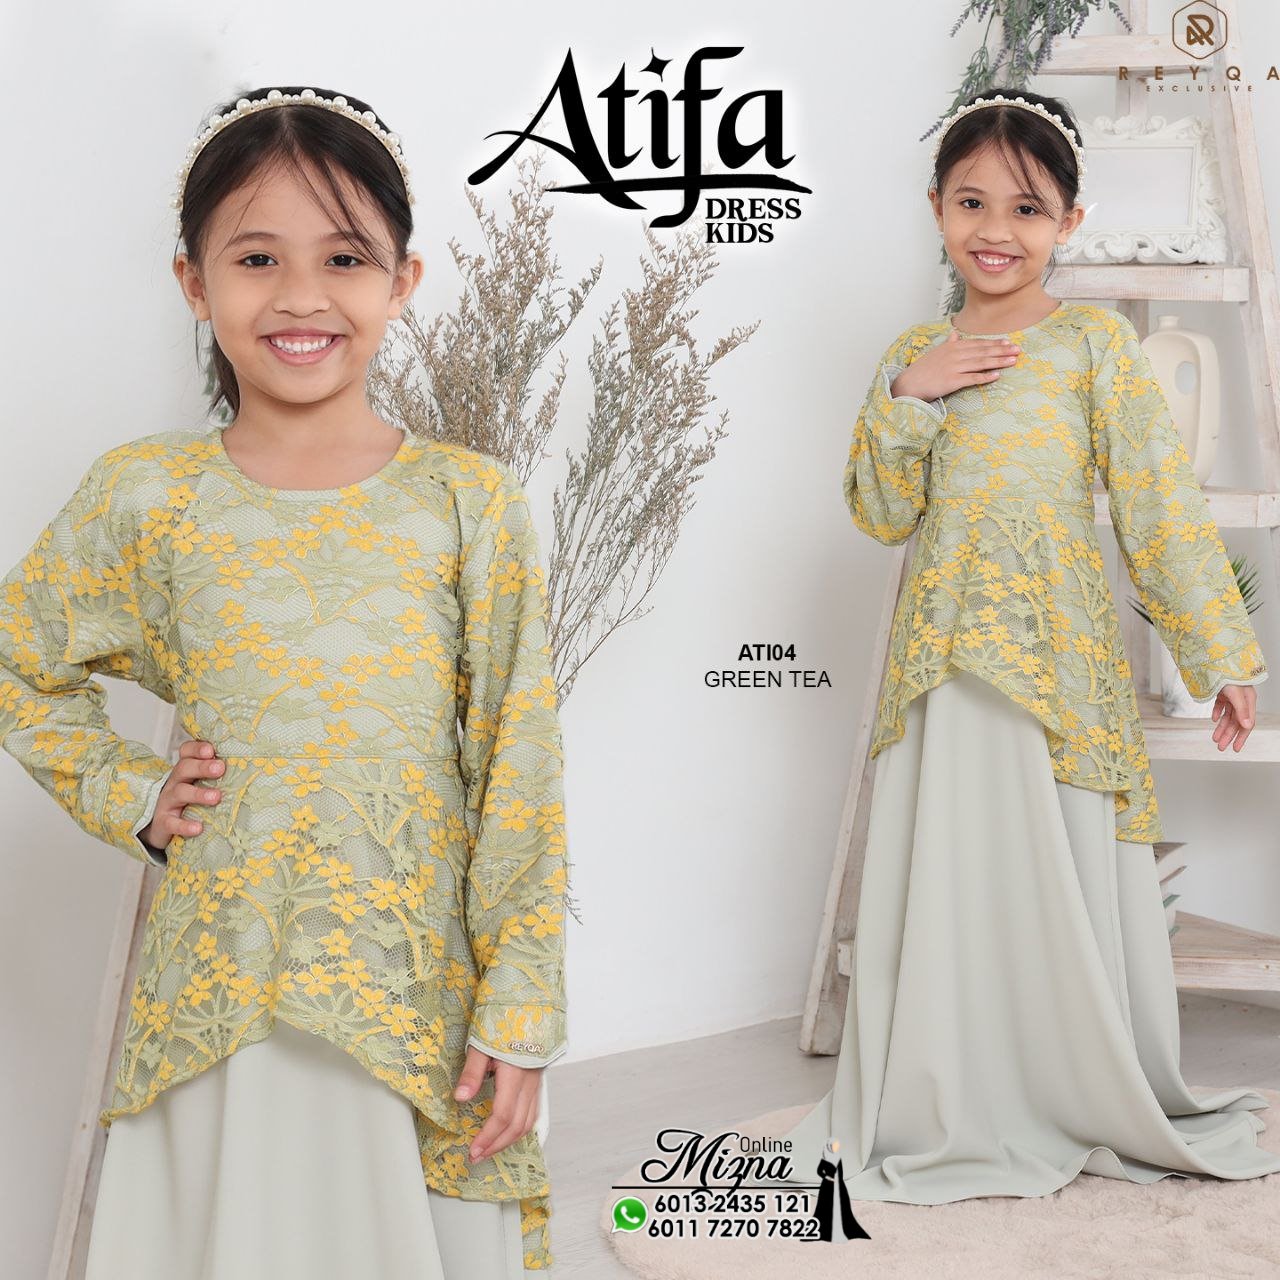 DRESS COLLECTIONS, JUBAH COLLECTIONS, LACE PRINCESS DRESS, PRINCESS DRESS, LACE DRESS, DRESS SEDONDON, DRESS IBU DAN ANAK, MOM AND KIDS DRESS, BABY DRESS, BABY GOWN, KIDS DRESS, DRESS KANAK-KANAK, MUSLIMAH DRESS, MUSLIMAH JUBAH DRESS